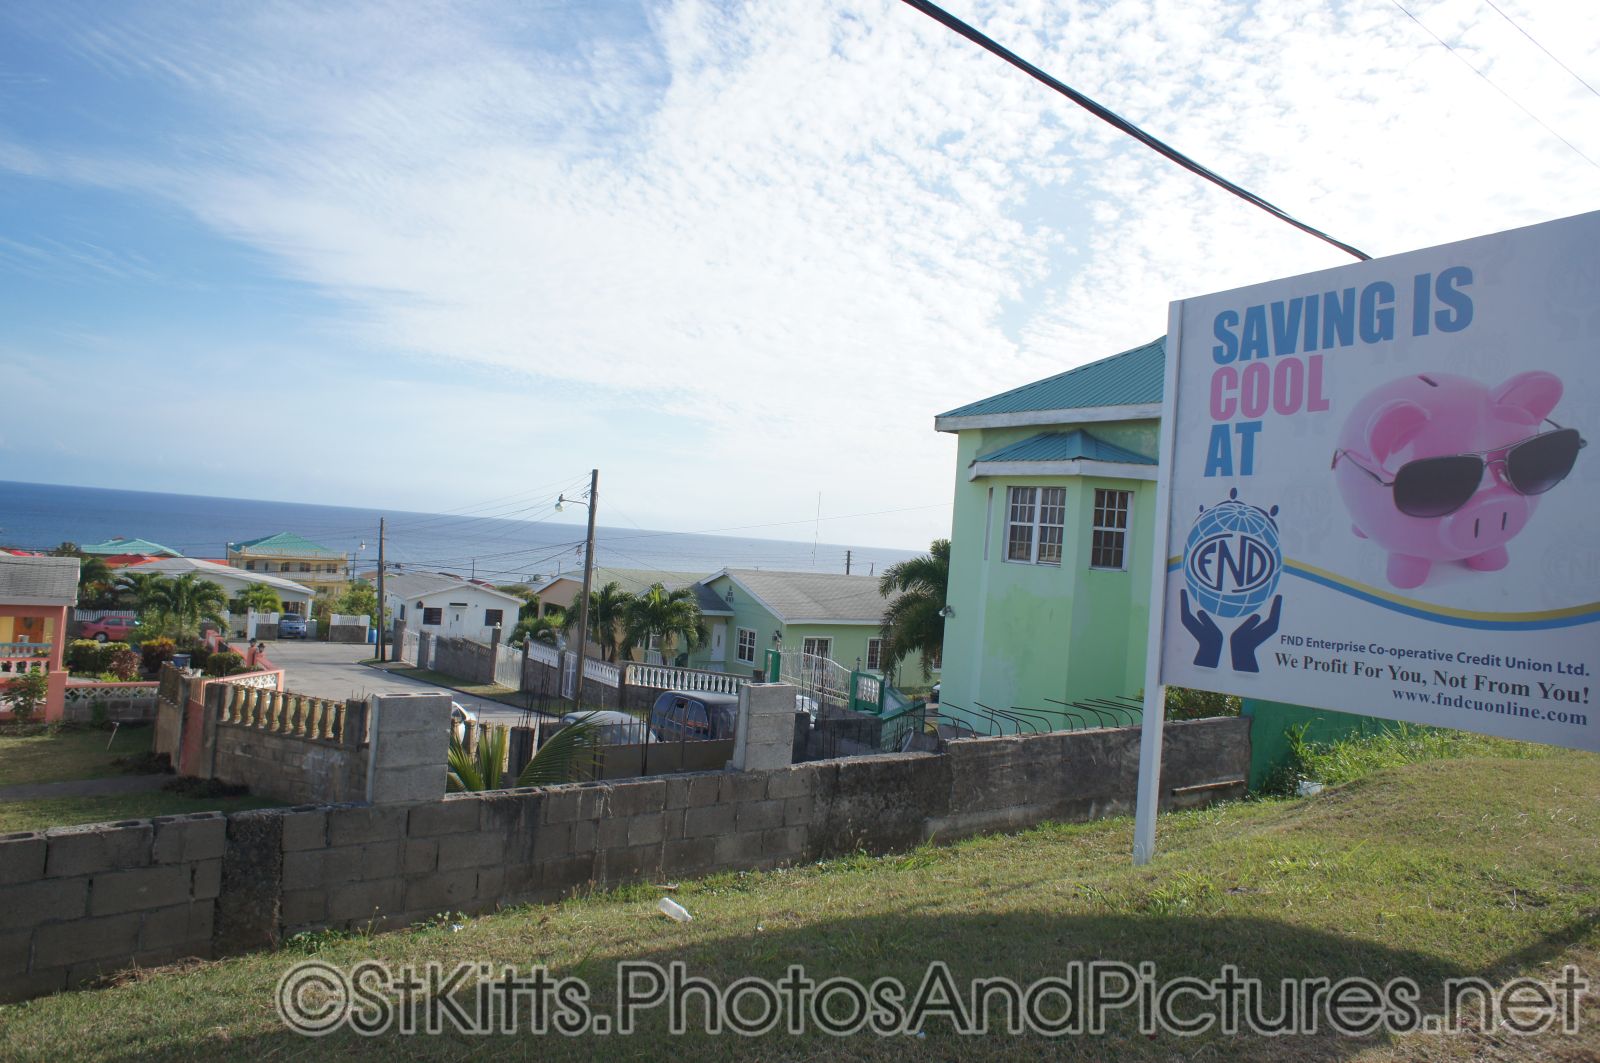 St Kitts Homes and Saving is Cool sign.jpg
